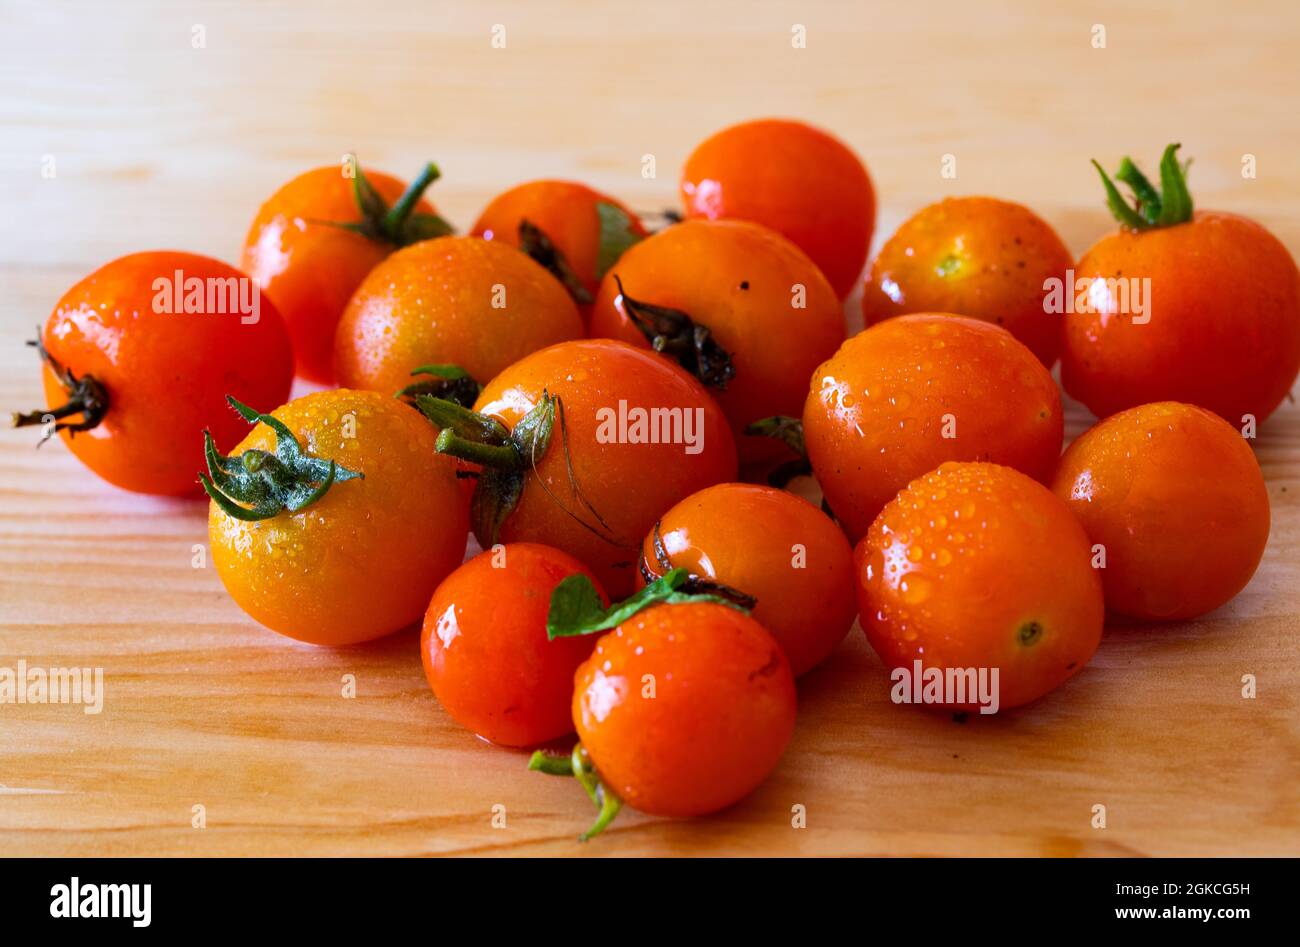 Fresh Tumbling Tom Tomatoes complete with their stalks and small droplets of water on a wooden chopping board Stock Photo